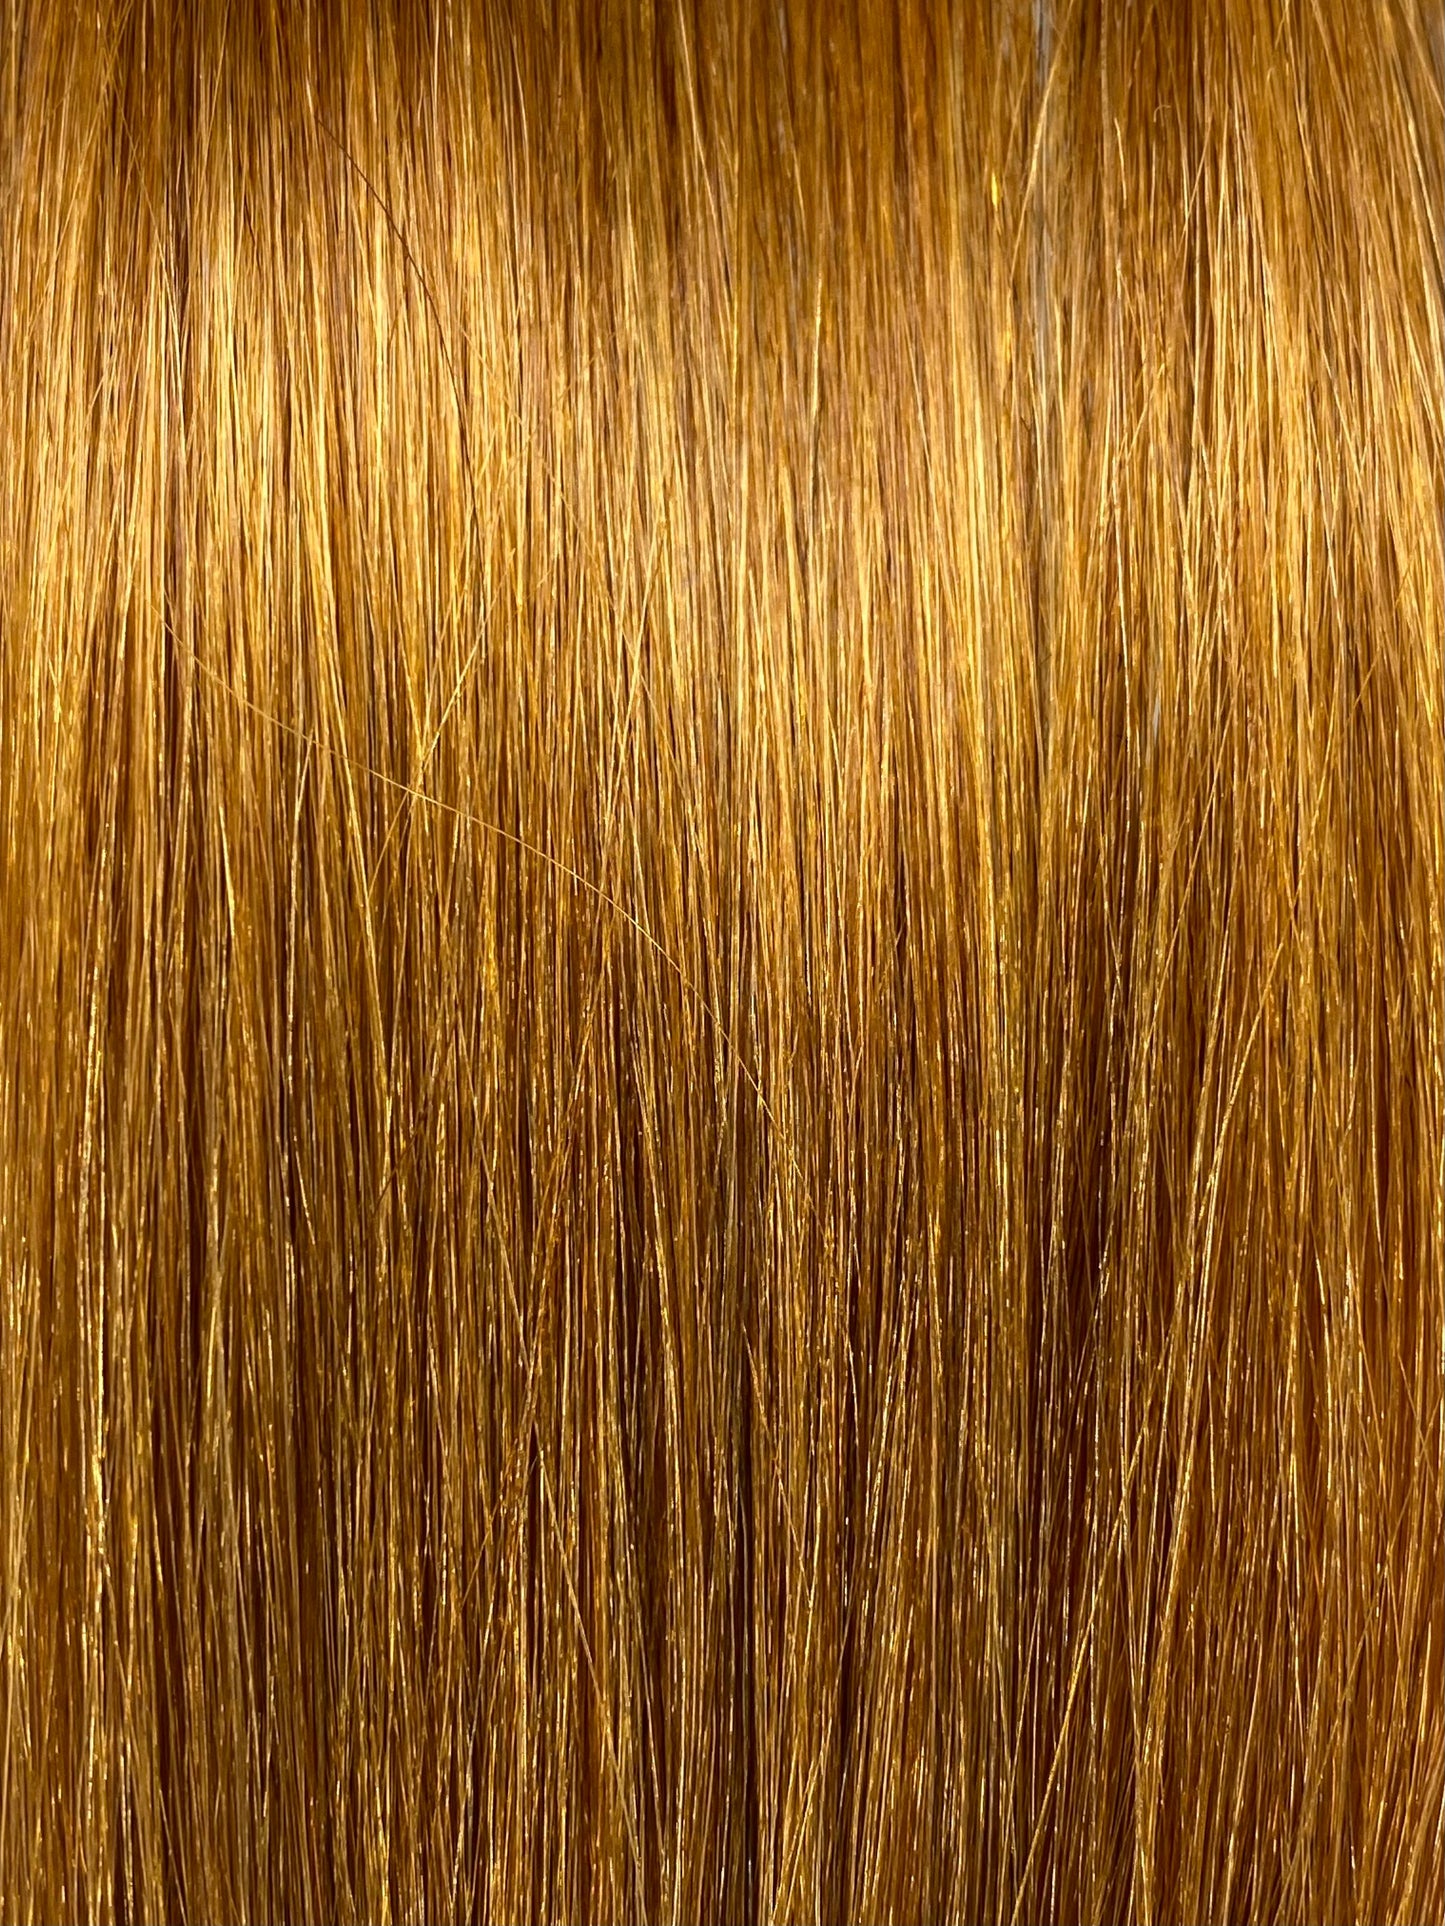 50% OFF Tape in hair extensions #27 - 50cm/ 20inches- Golden Blonde Tape Euro So Cap 